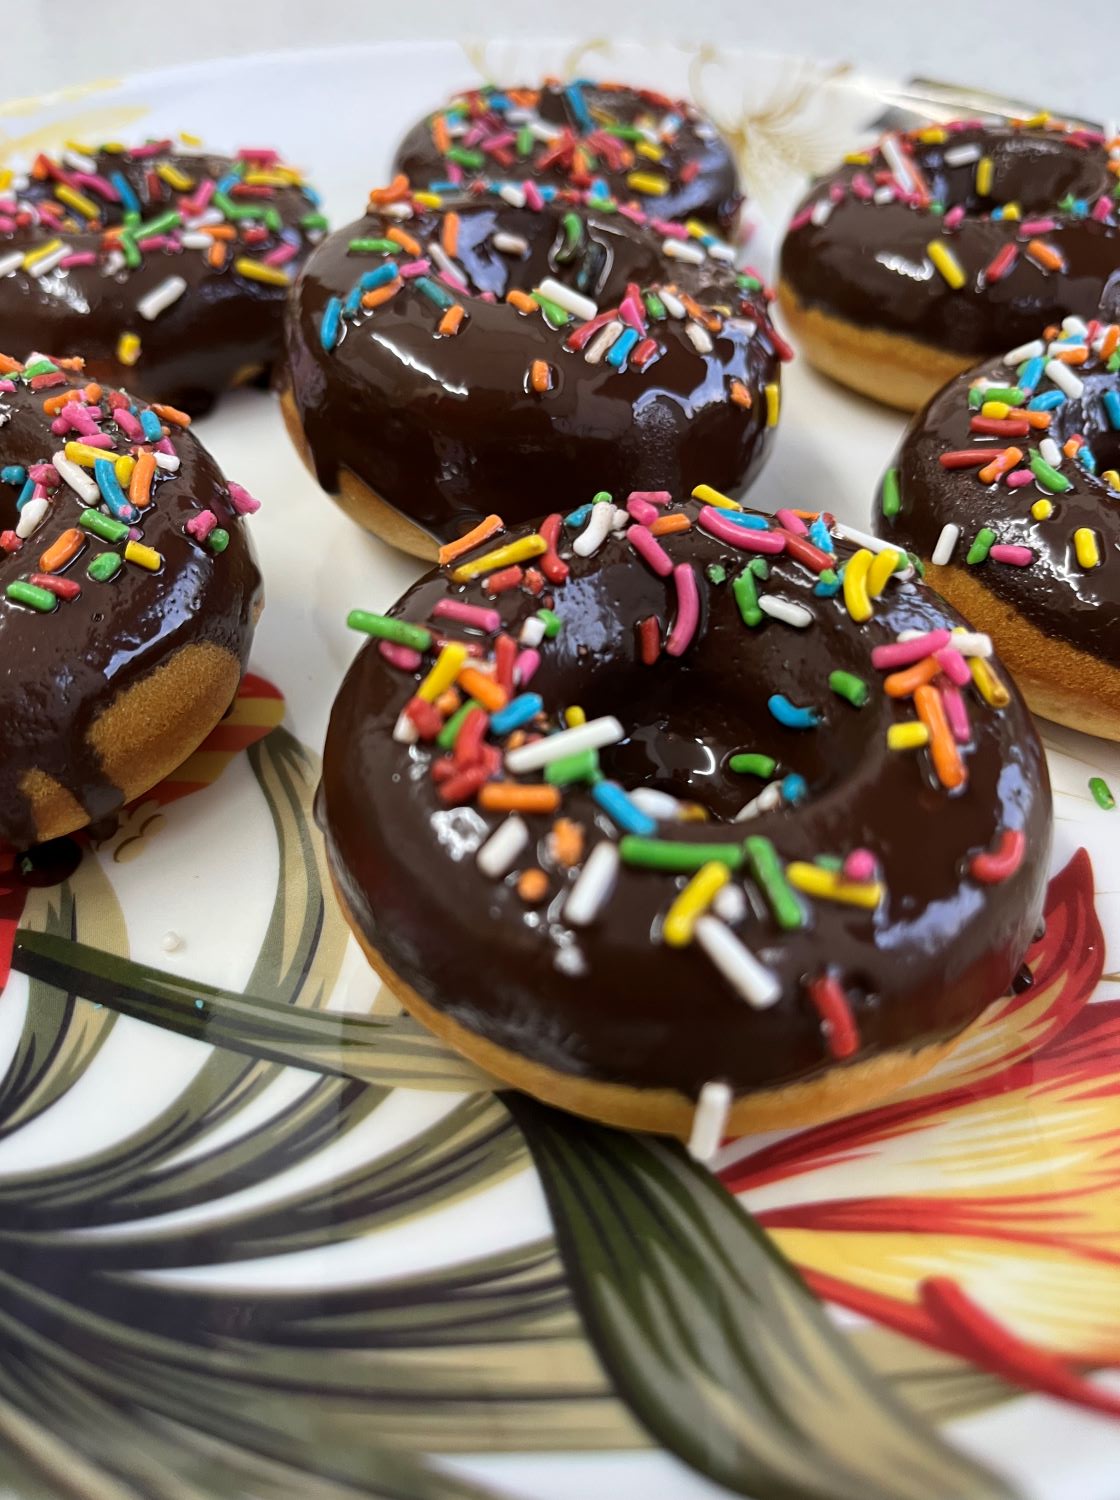 Baked Doughnut Drizzled With Chocolate Rice